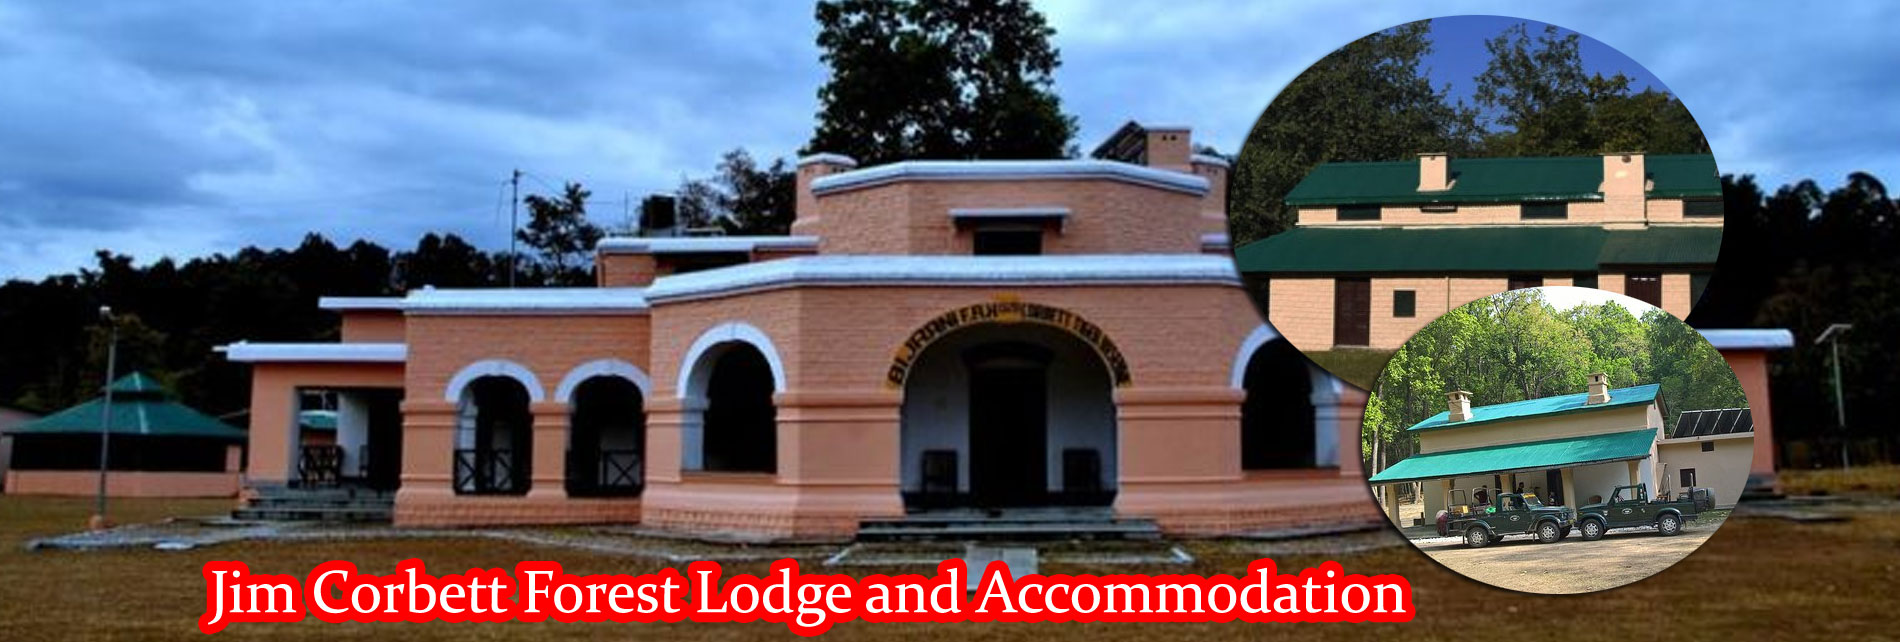 Jim Corbett Forest Lodge and Accommodation